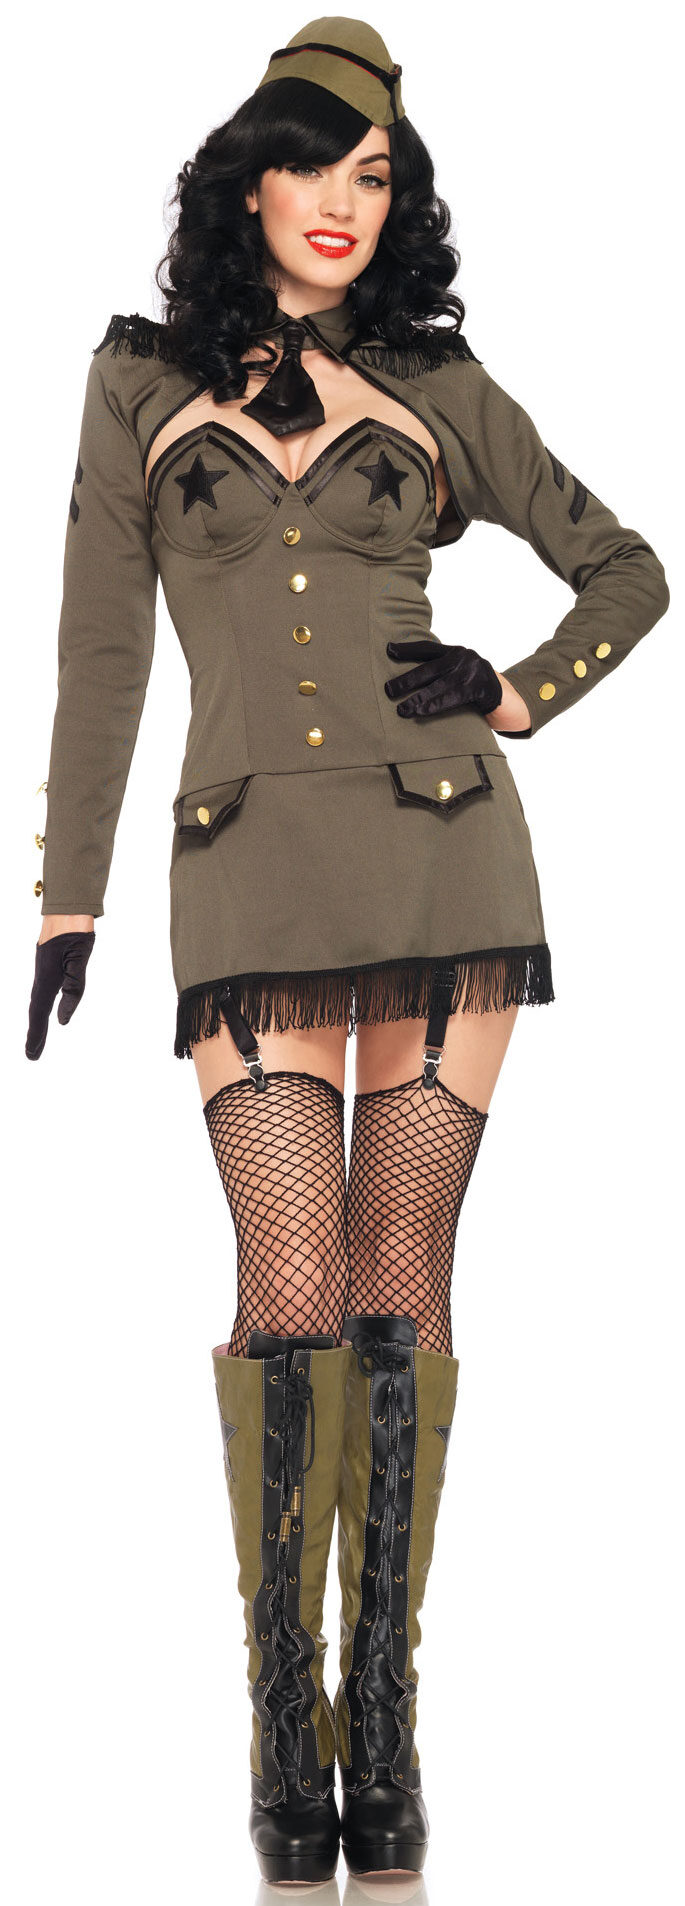 Sexy Pin Up Army Girl Military Costume - Mr. Costumes